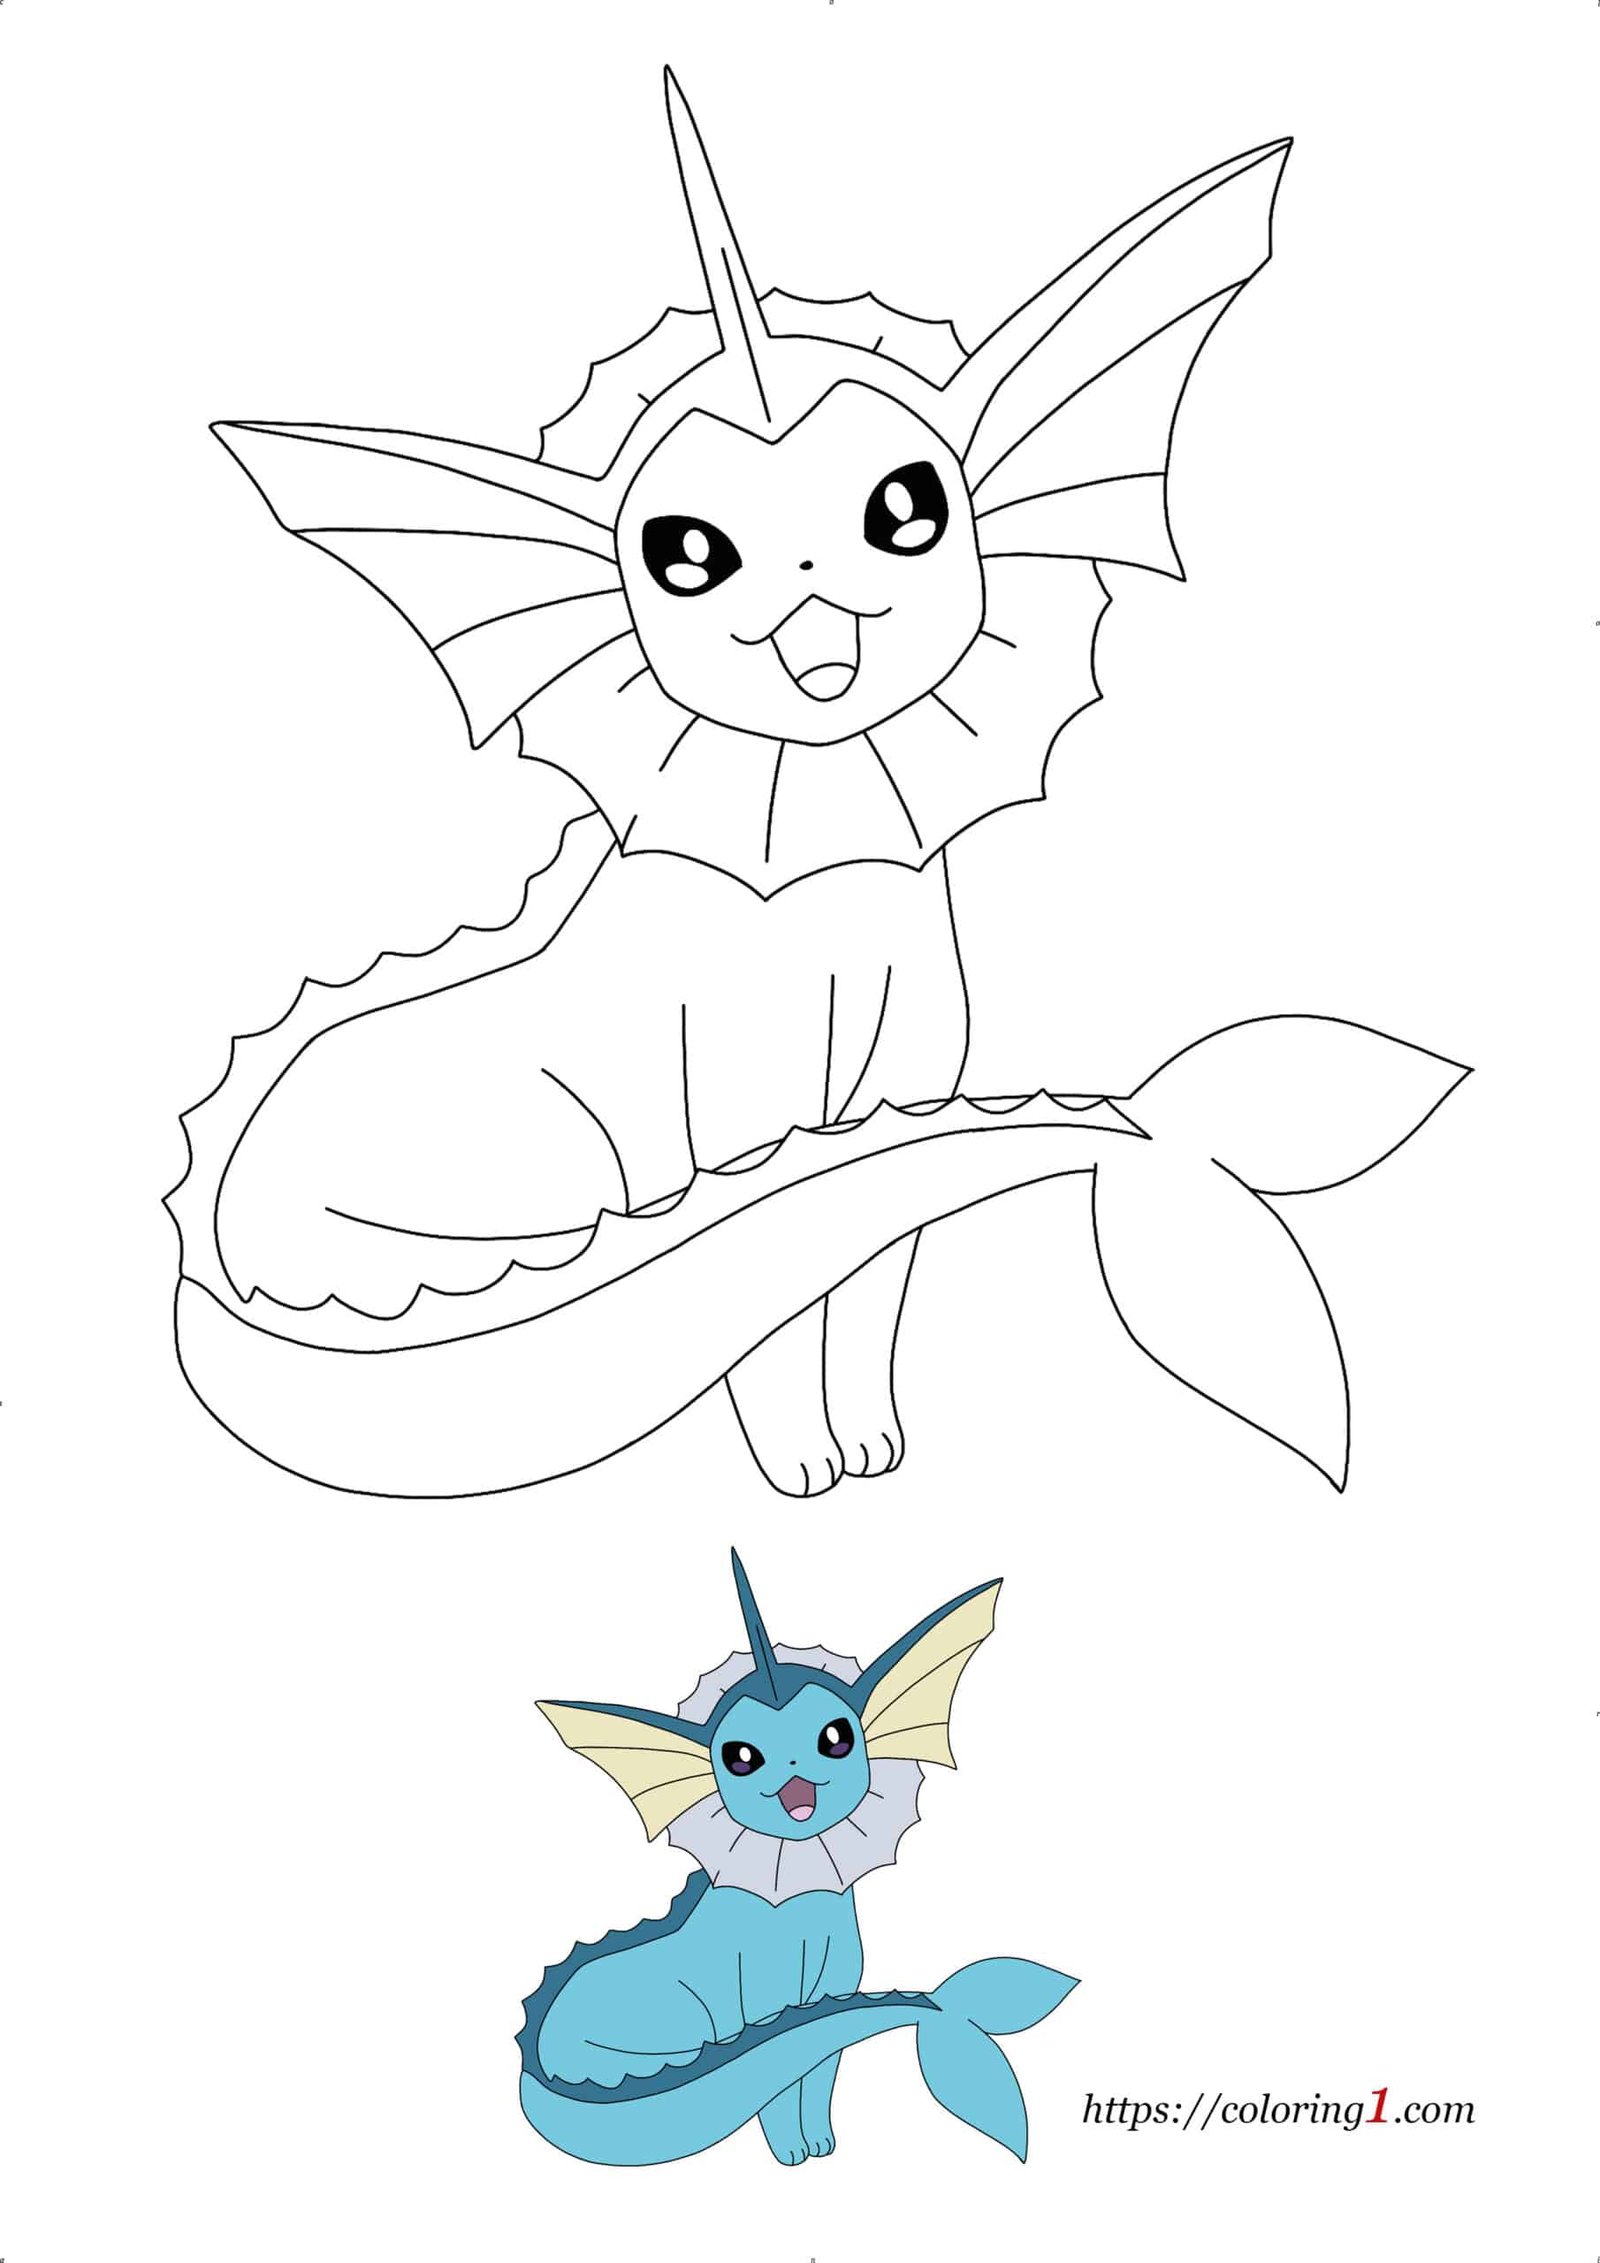 Pokemon Eevee Evolutions Vaporeon coloring page for kids with sample